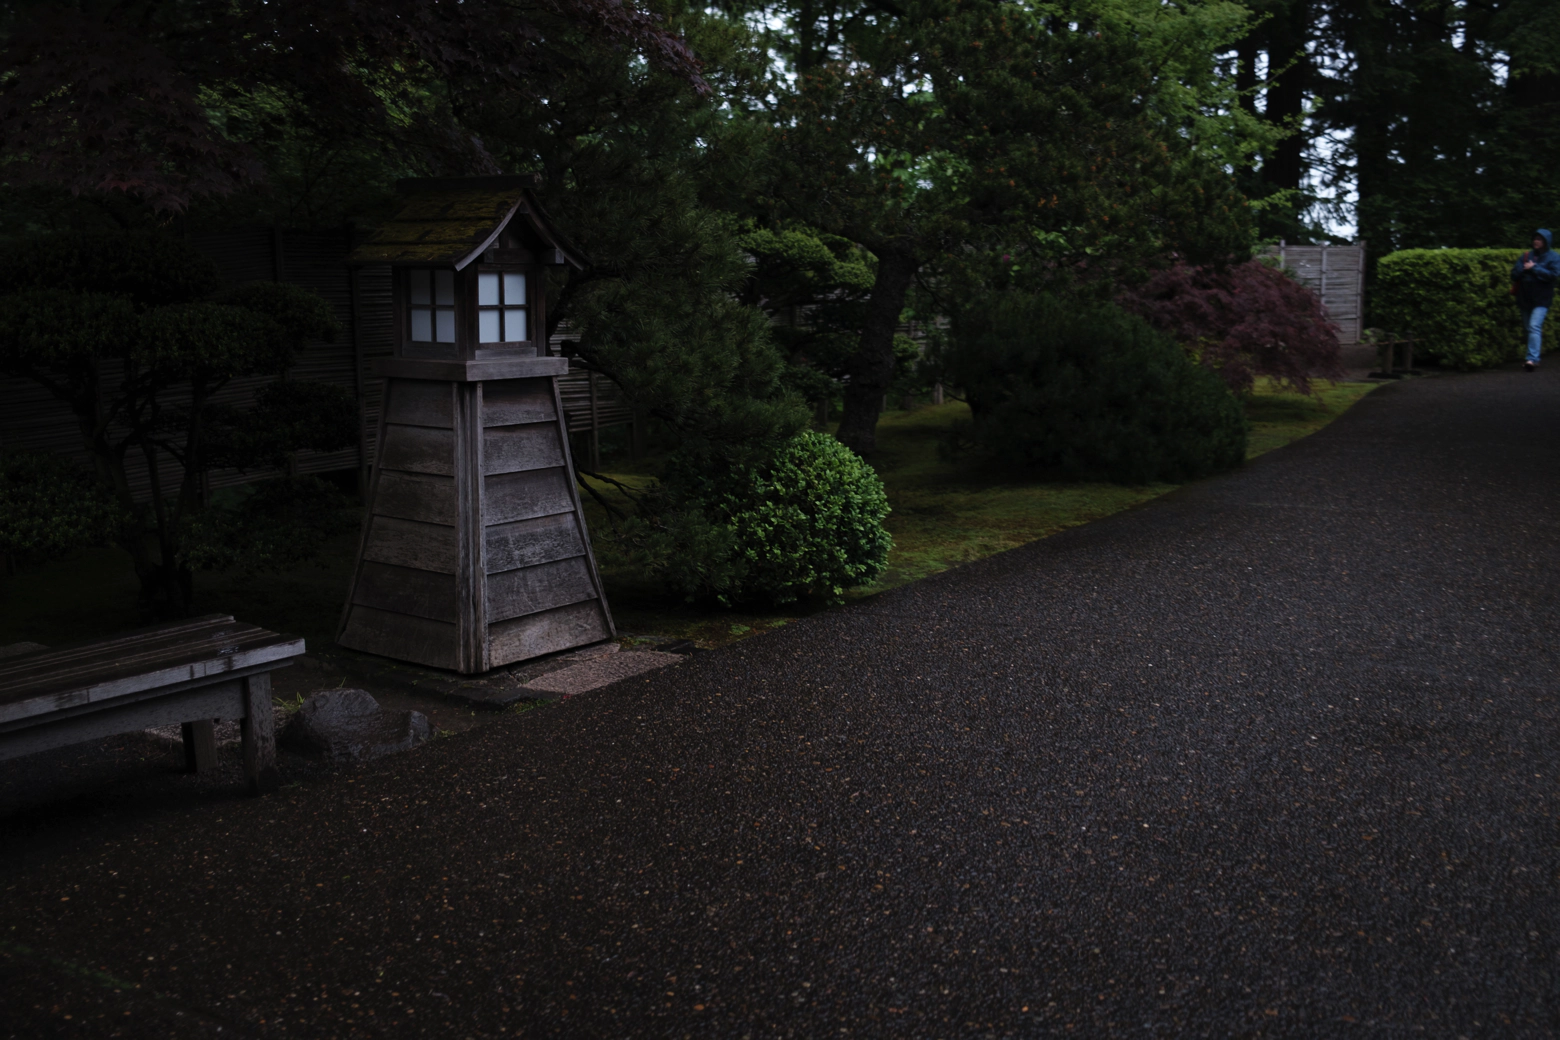 A Japanese lantern in the middle of the street.